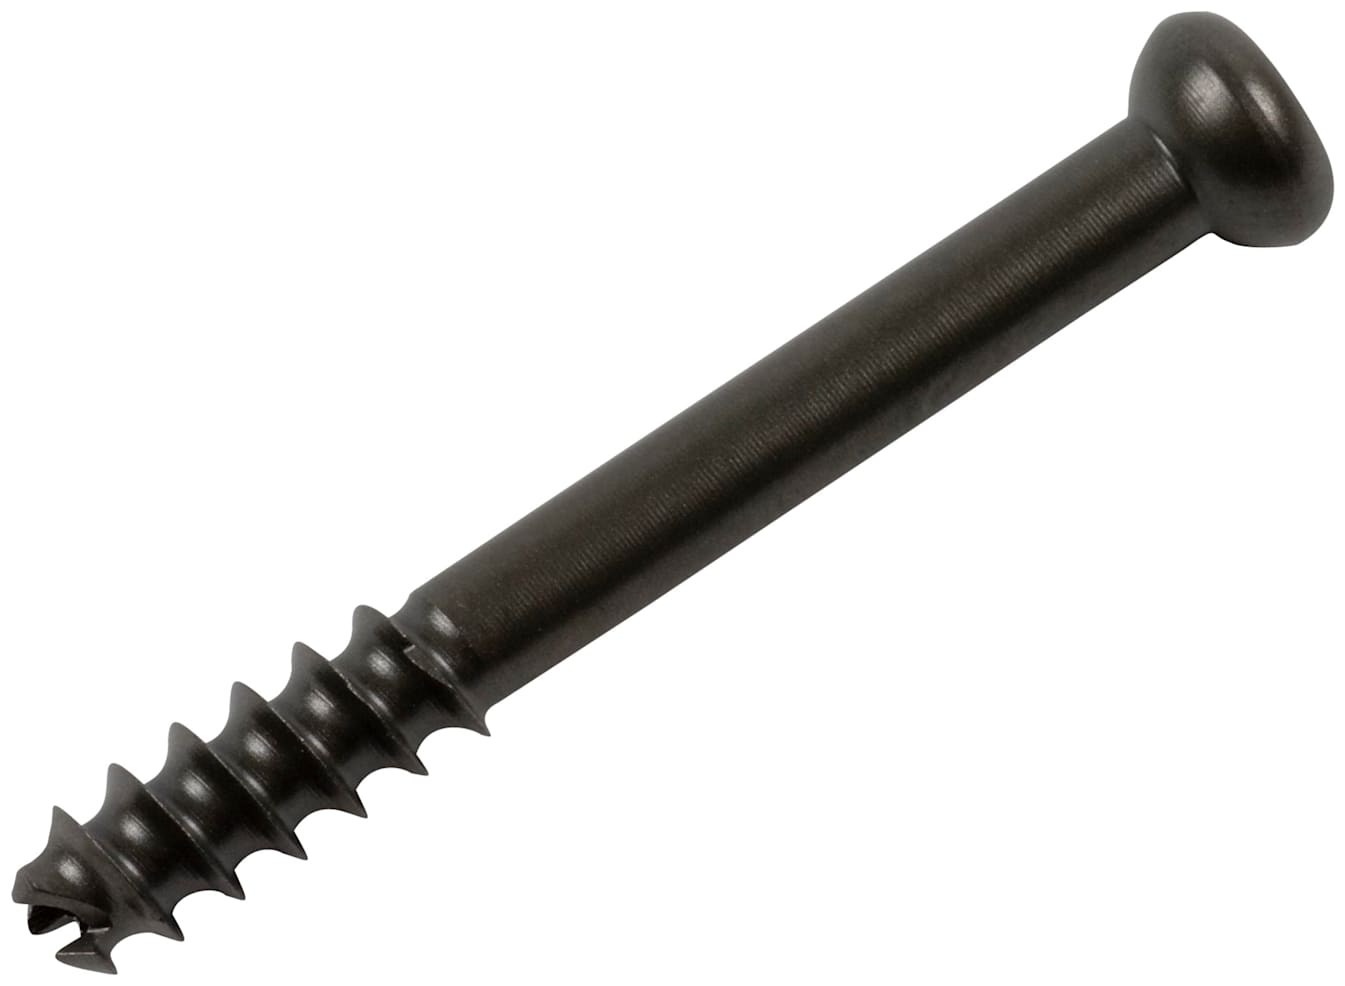 Low Profile Screw, Titanium, 4.5 mm x 36 mm, Cannulated, Partially Threaded